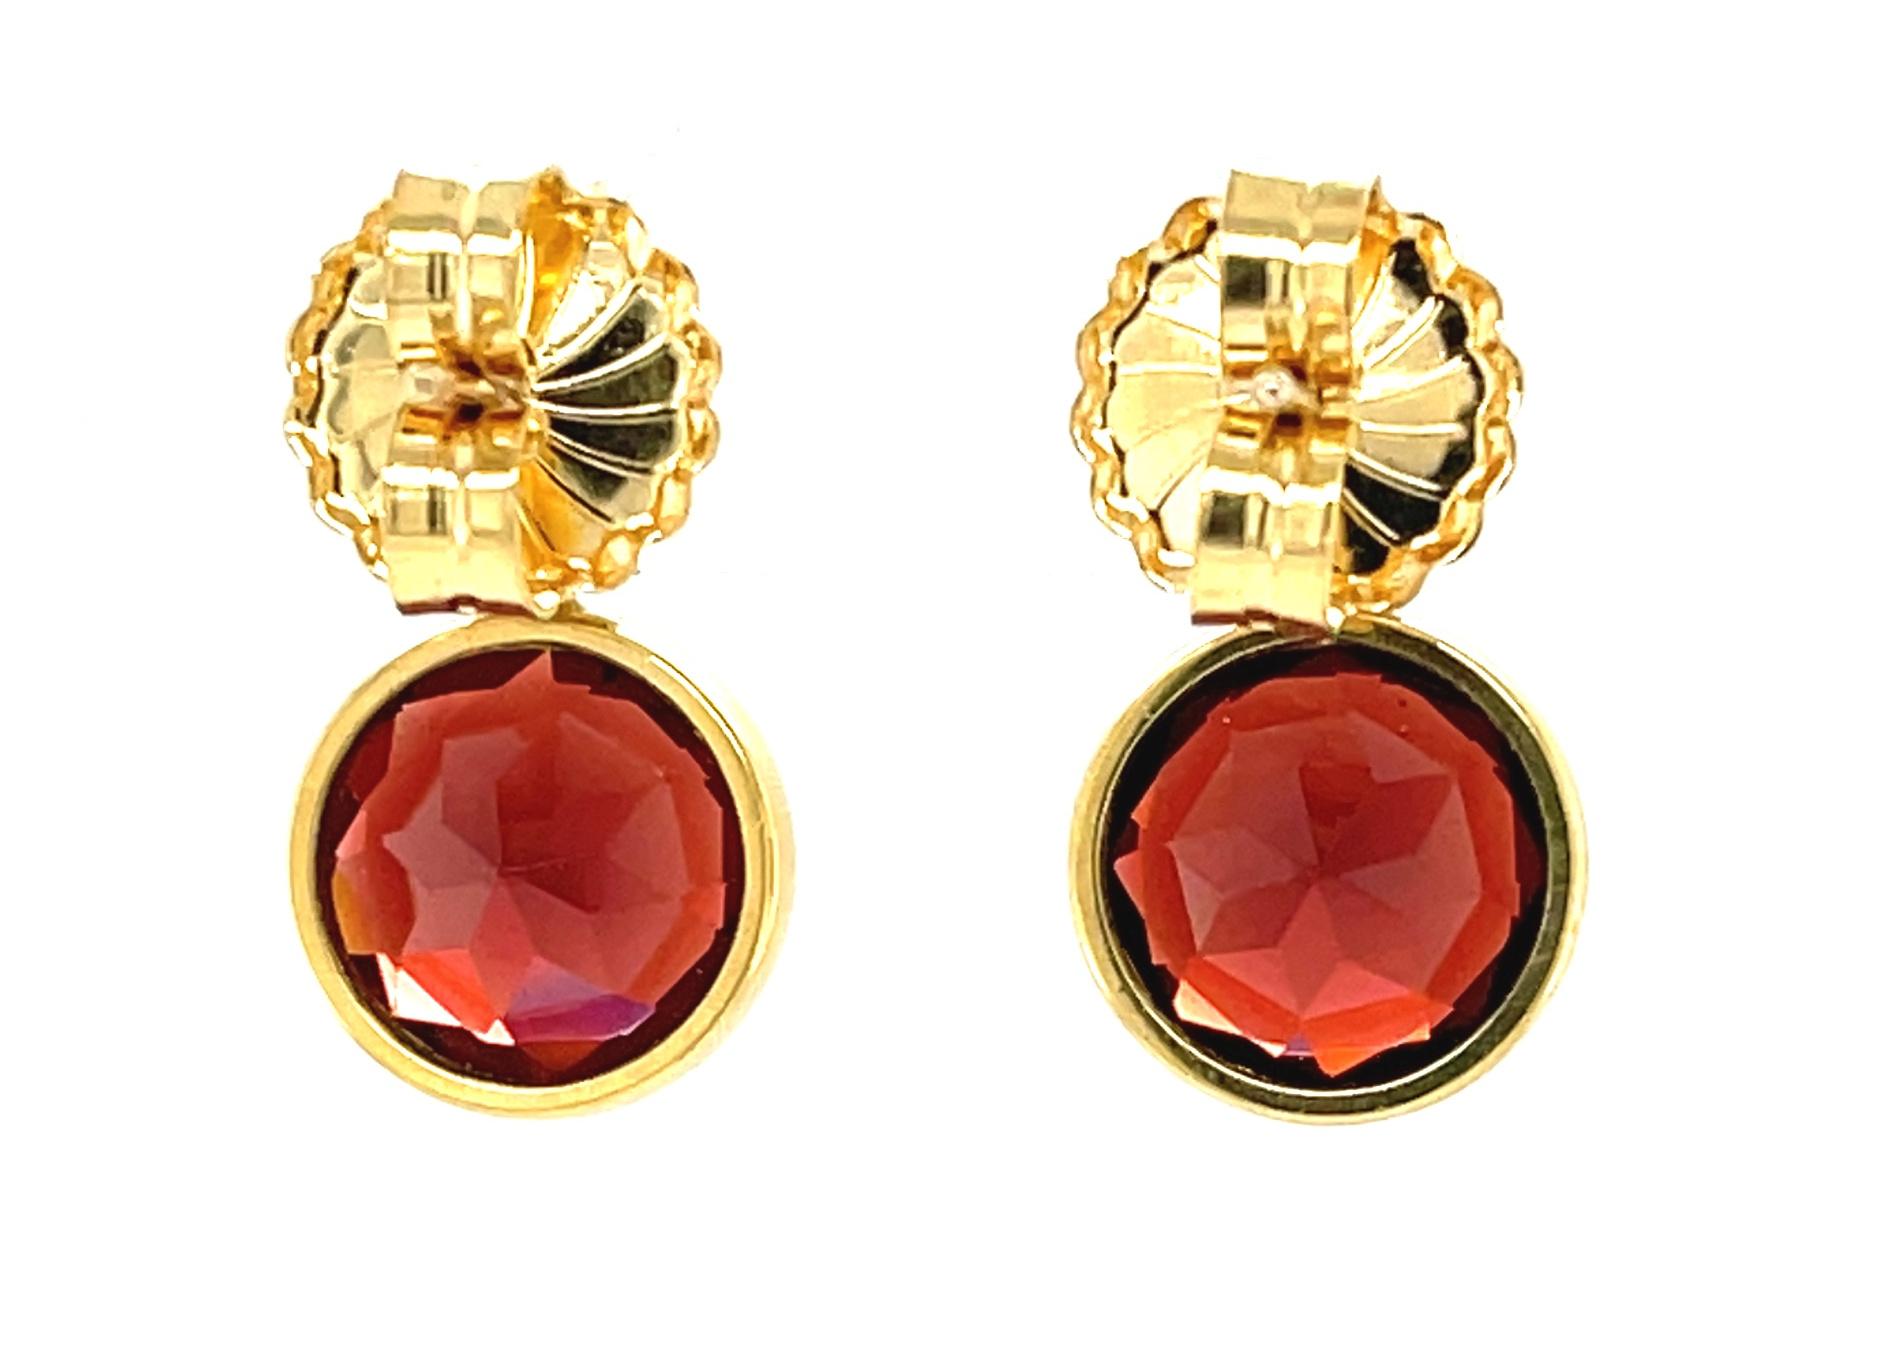 Artisan Red Garnet and Diamond Drop Earrings in 18k Yellow Gold, 7.90 Carats Total For Sale